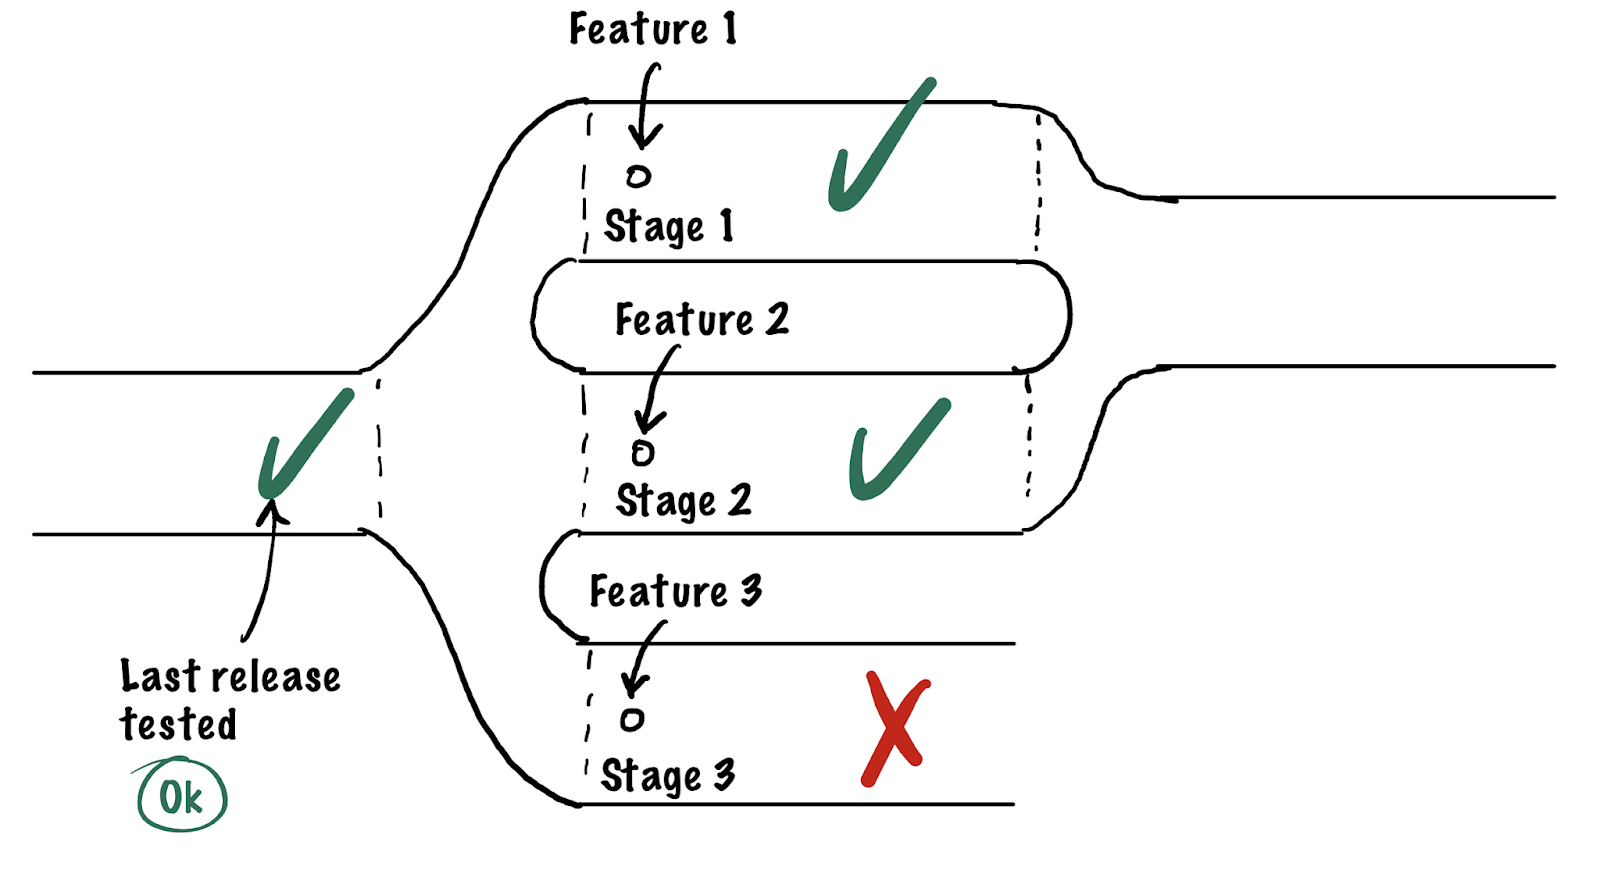 Separate staging for QA